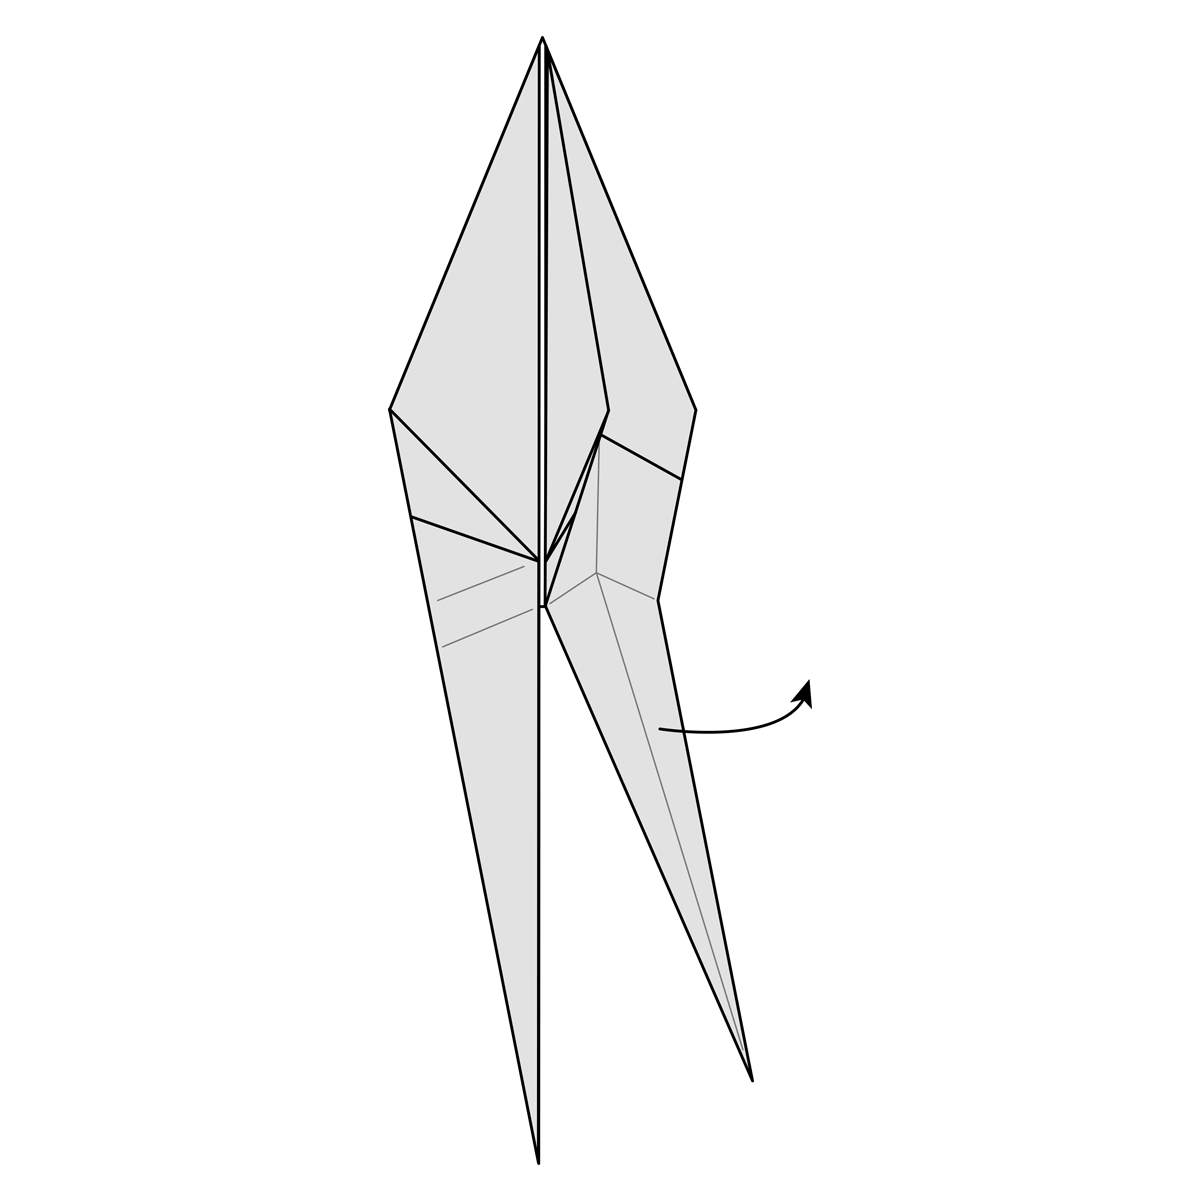 Origami Crane Directions Origami Crane How To Fold A Traditional Paper Crane